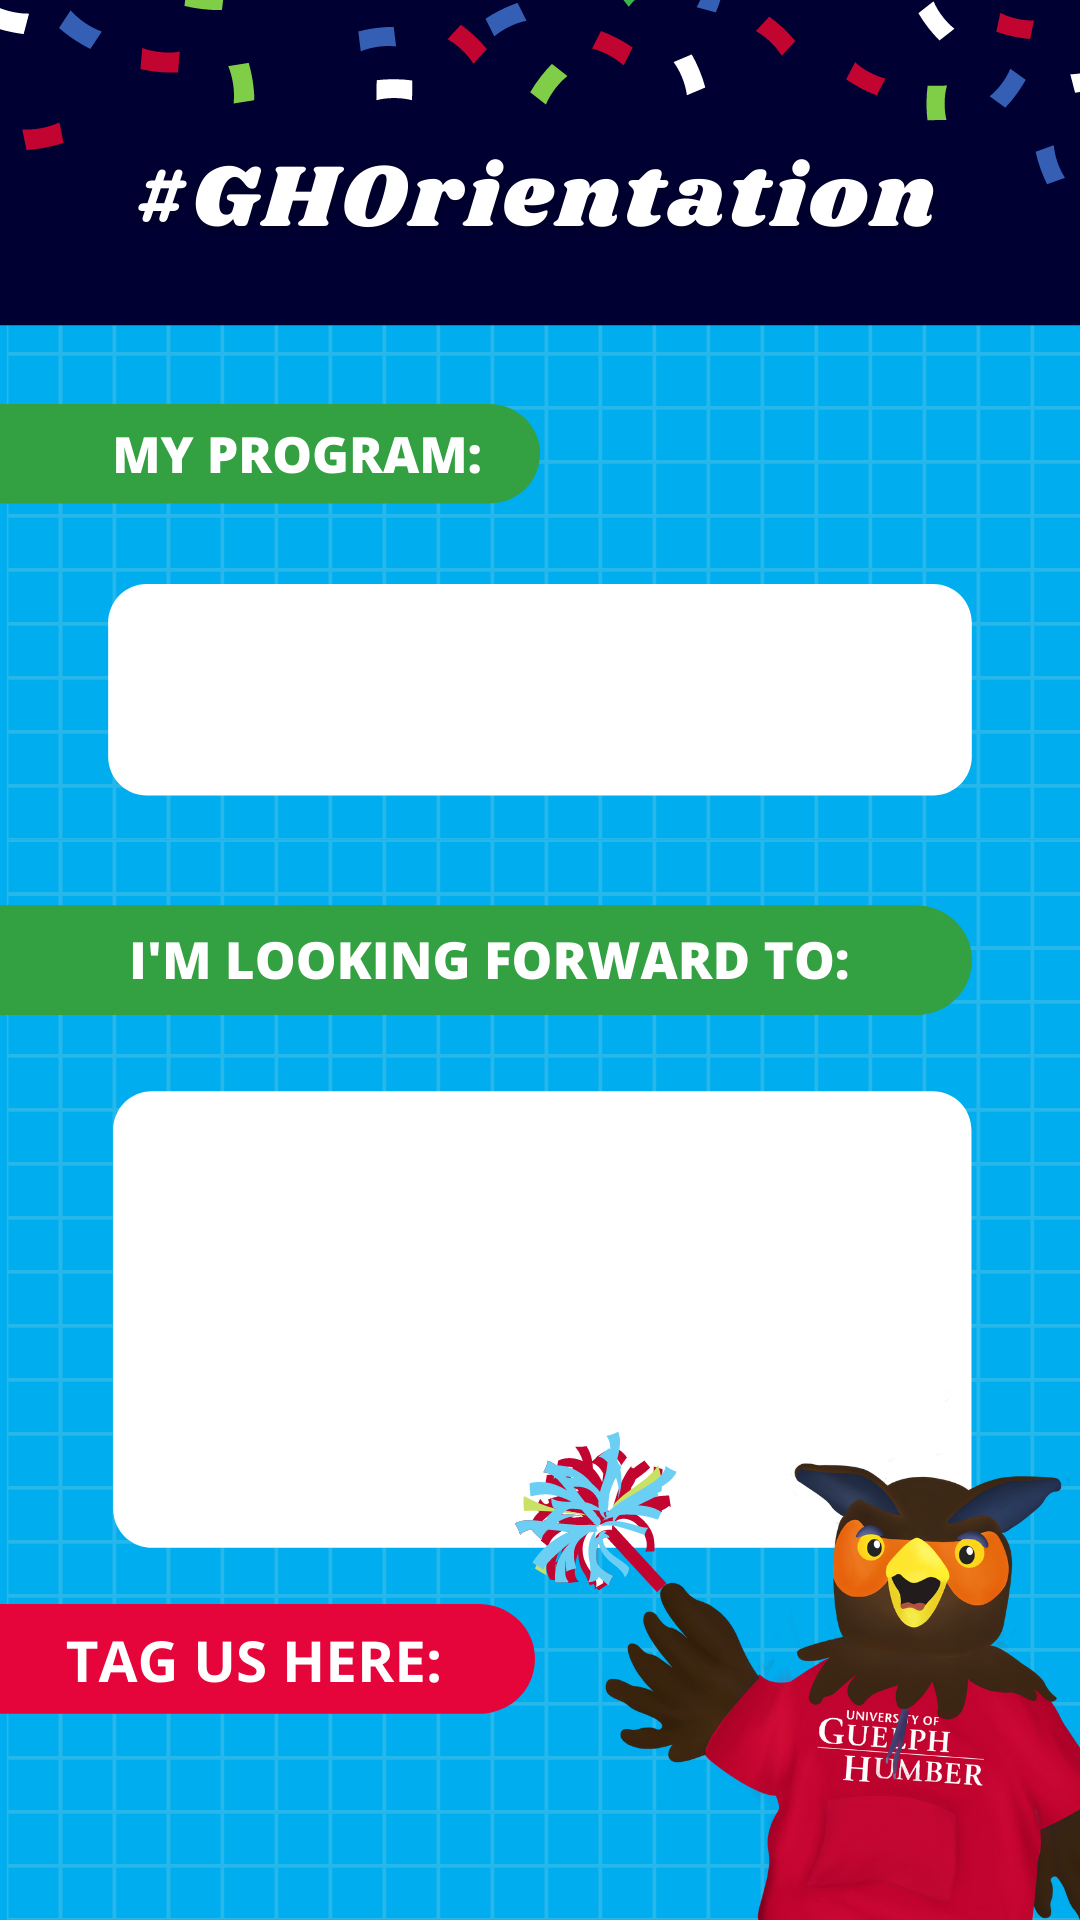 #GHOrientation template: My Program, I'm looking forward to